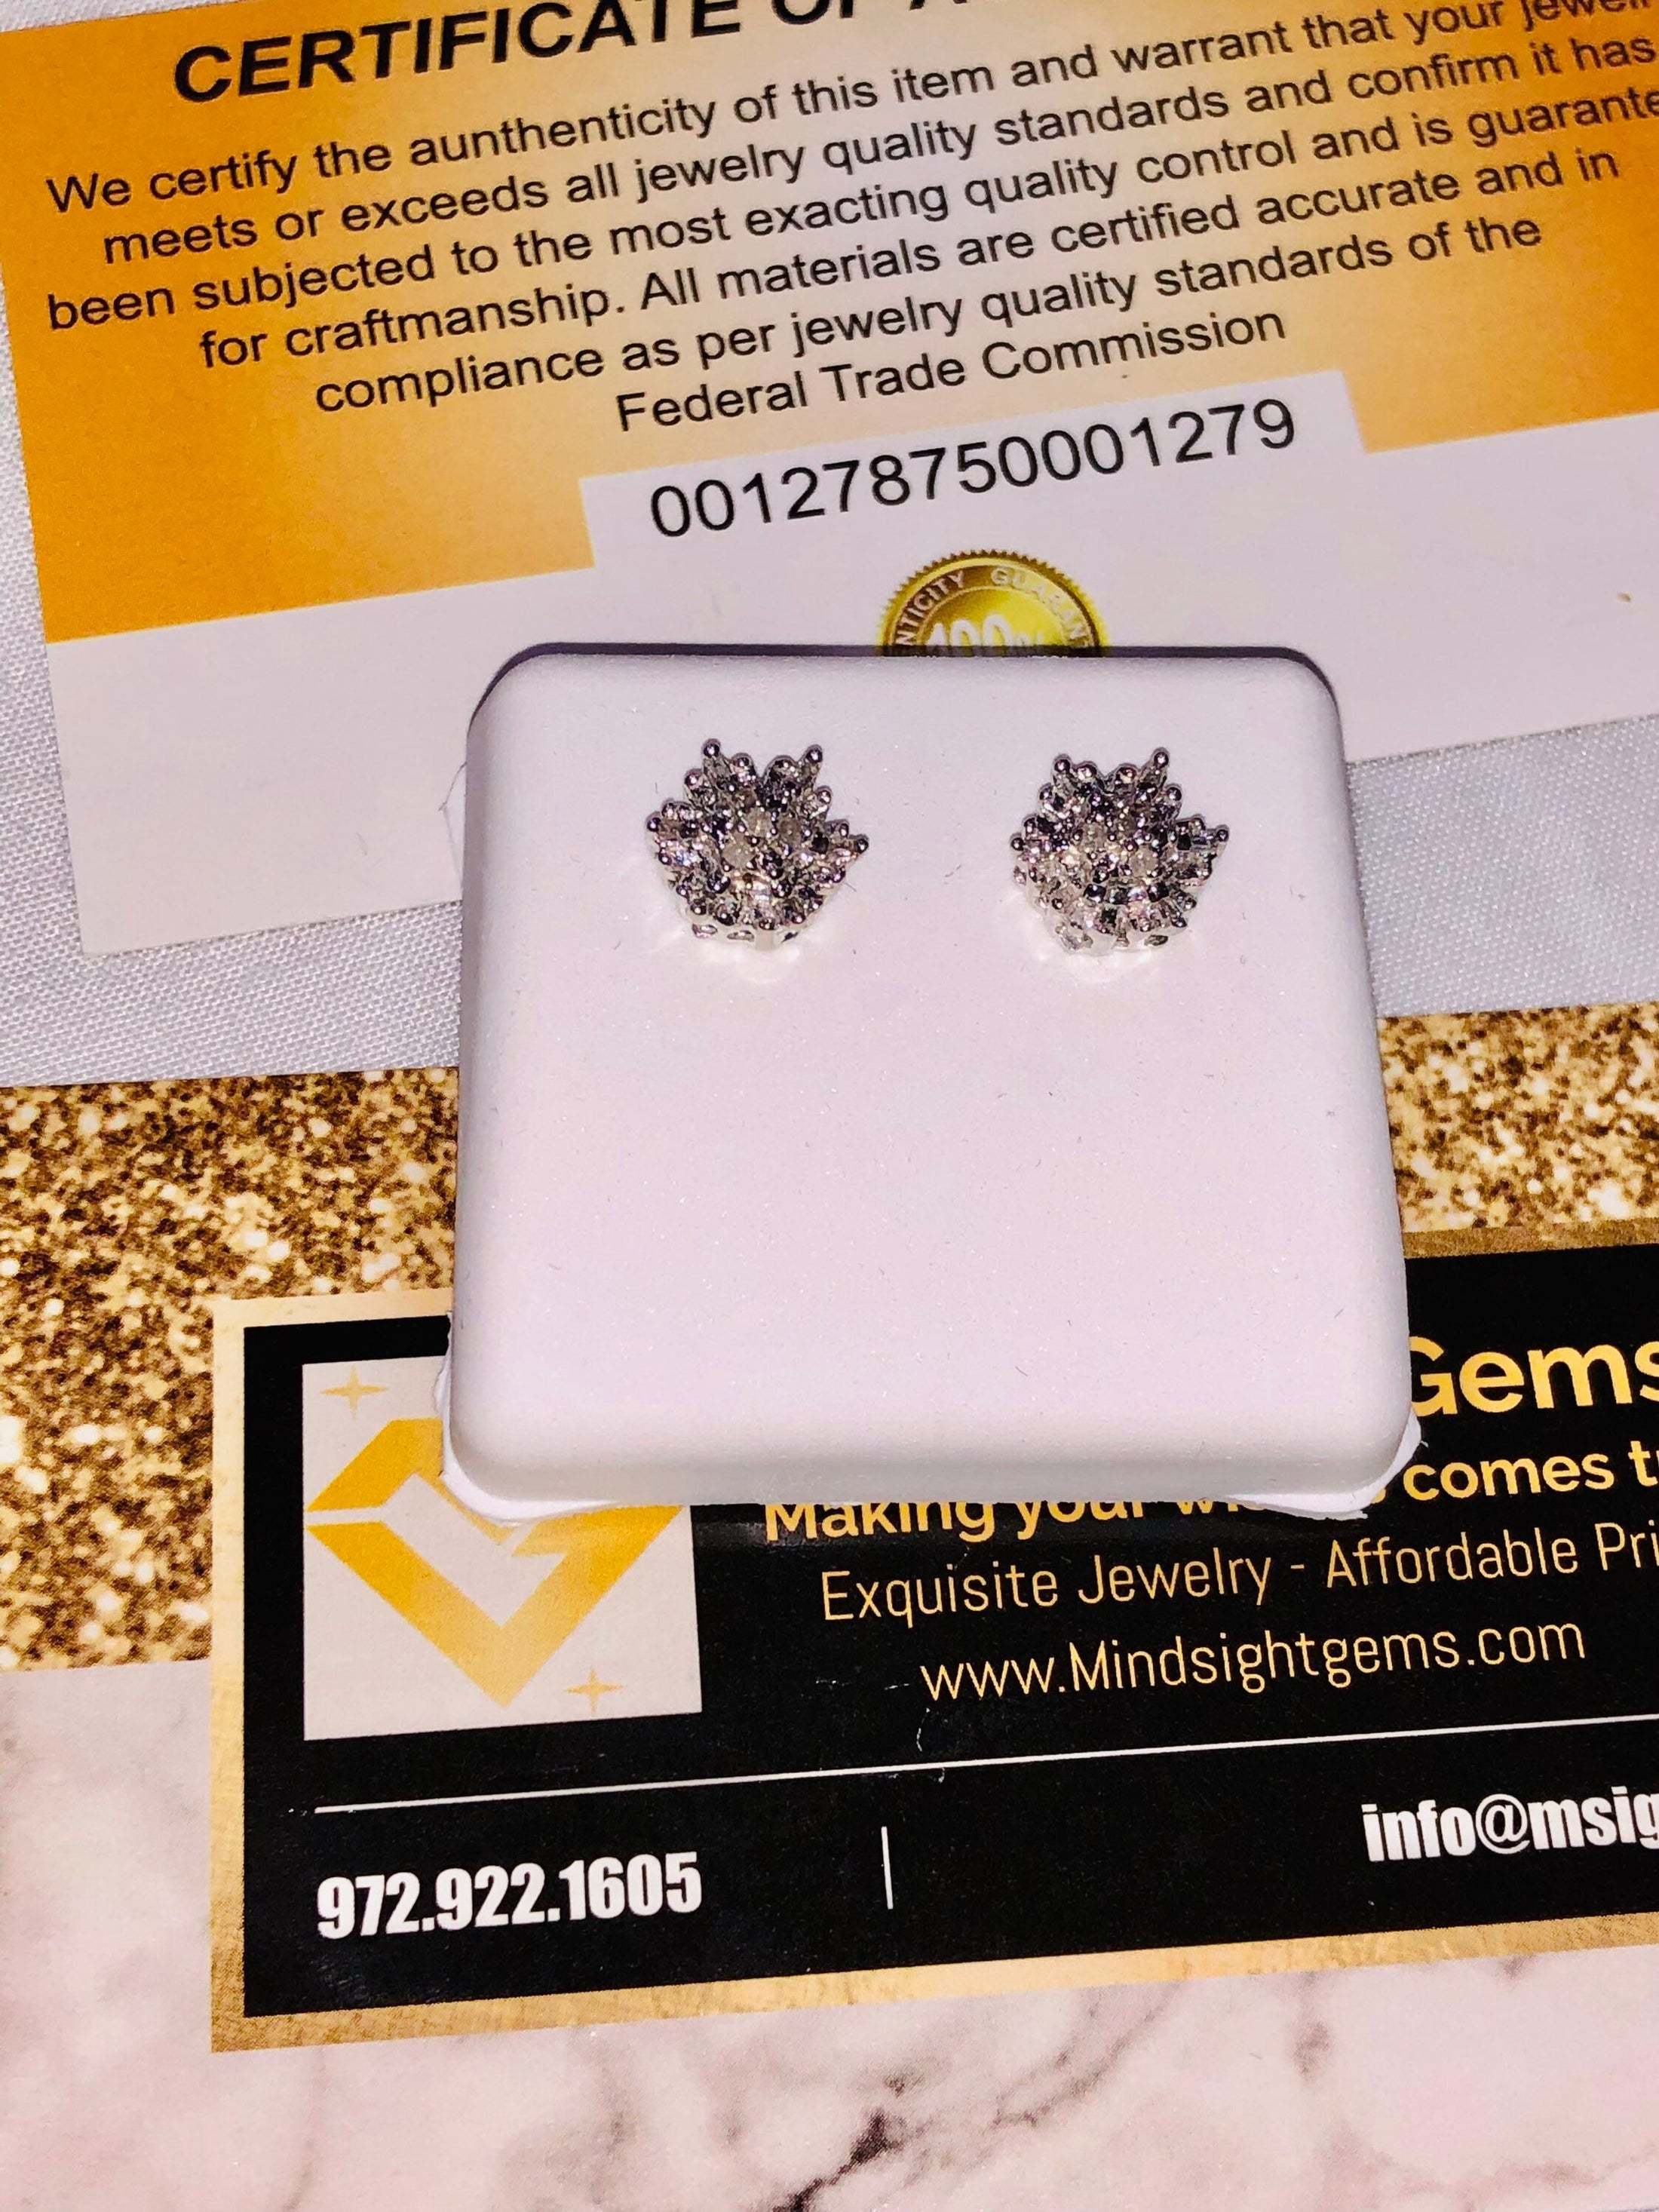 10k white gold vermeil real natural genuine diamond earrings, unisex, huge sale, NOT lab made not CZ, best Christmas occasions, 100% real